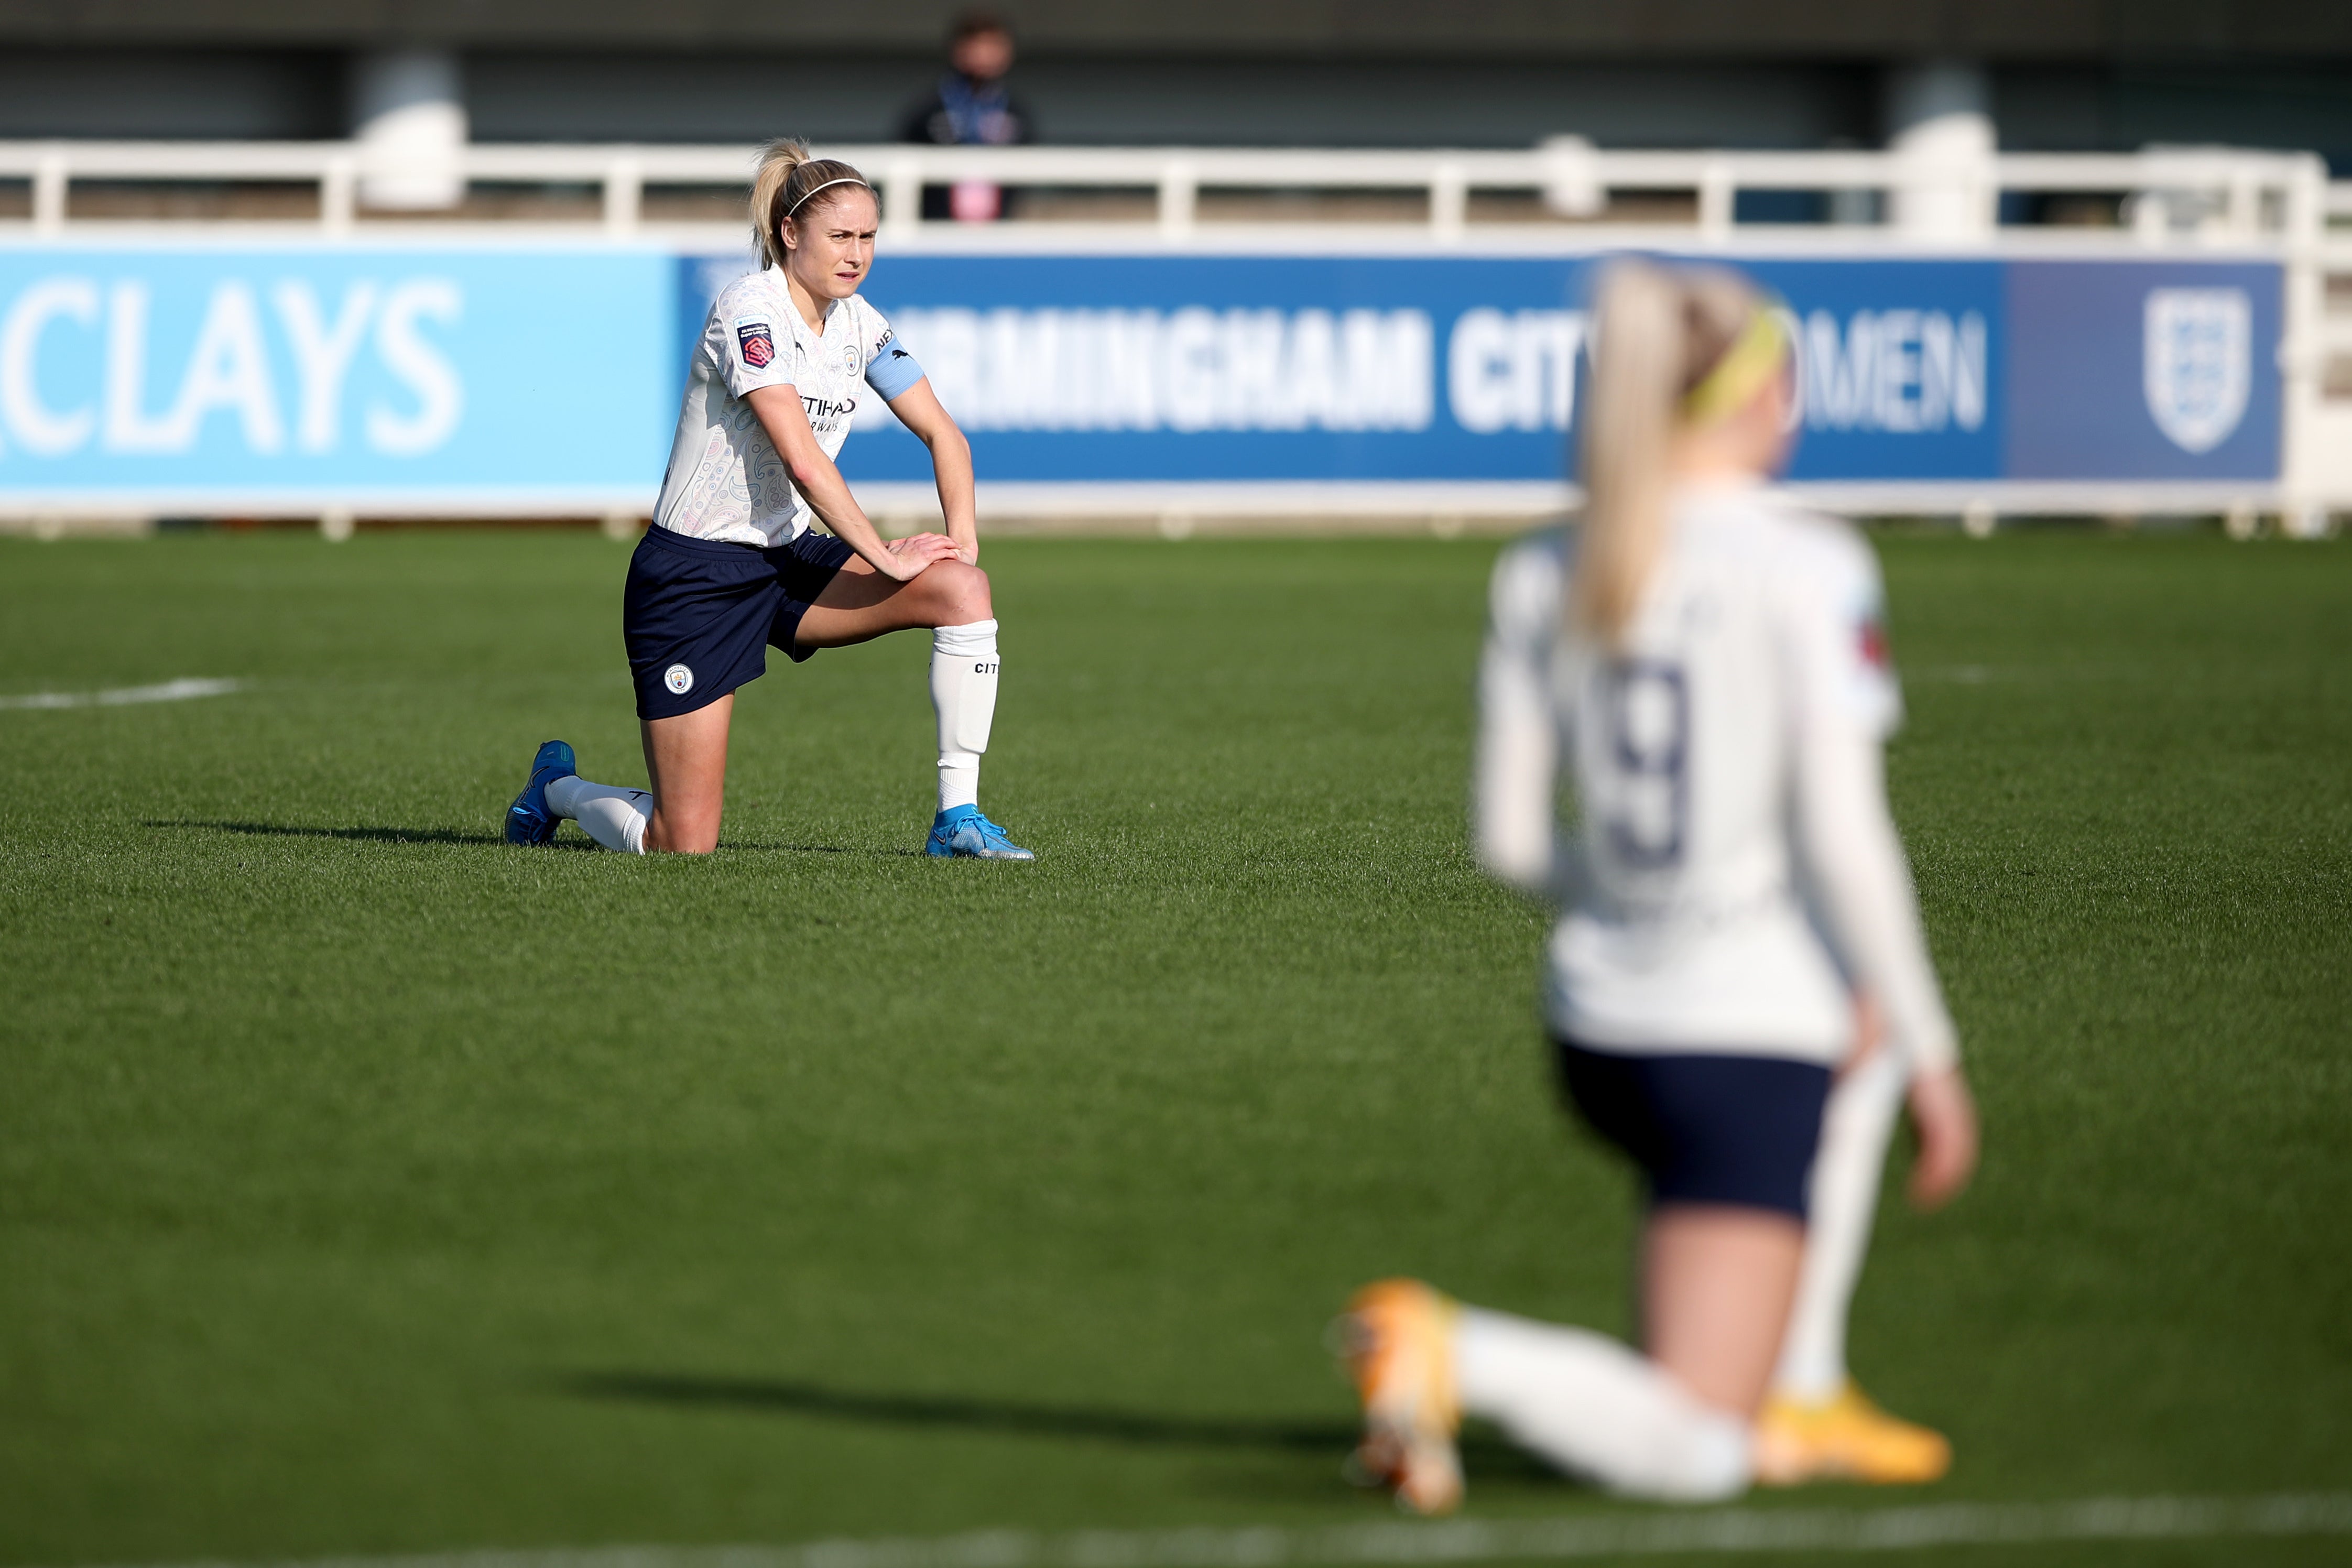 Manchester City’s Steph Houghton, left, takes the knee